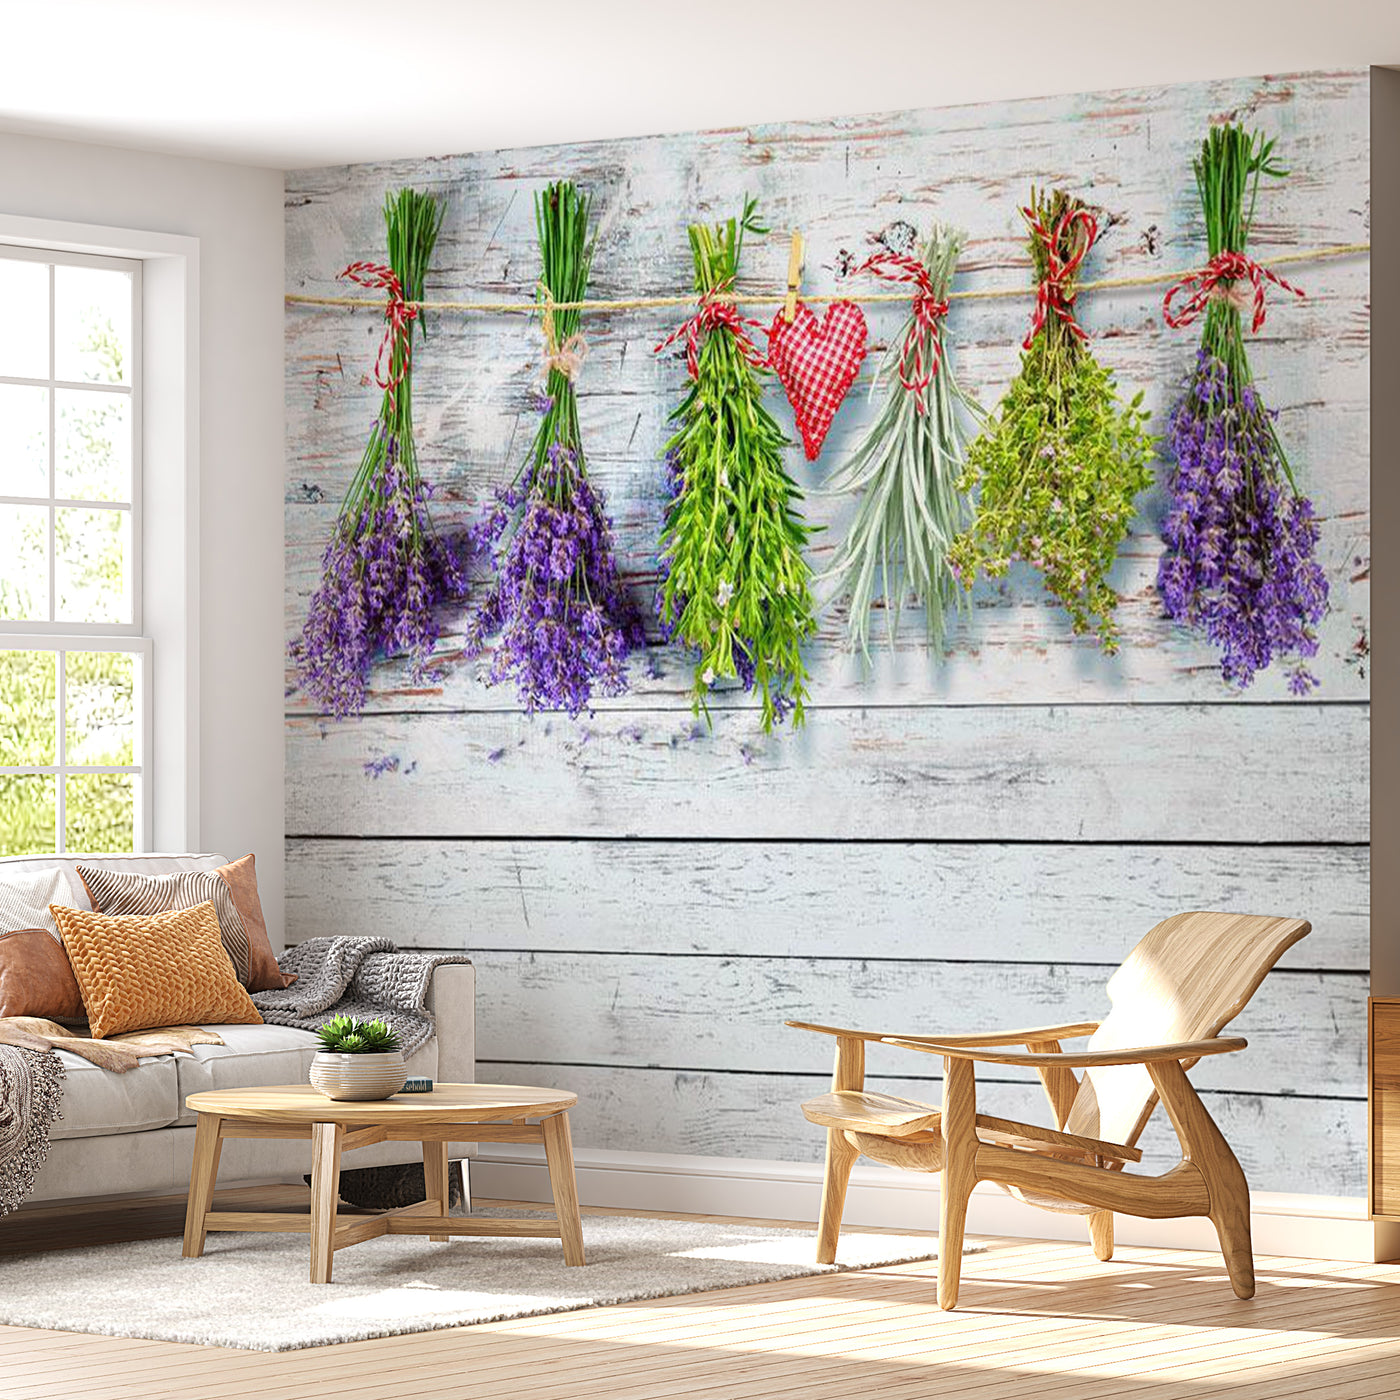 Peel & Stick Floral Wall Mural - Spring Inspirations - Removable Wall Decals